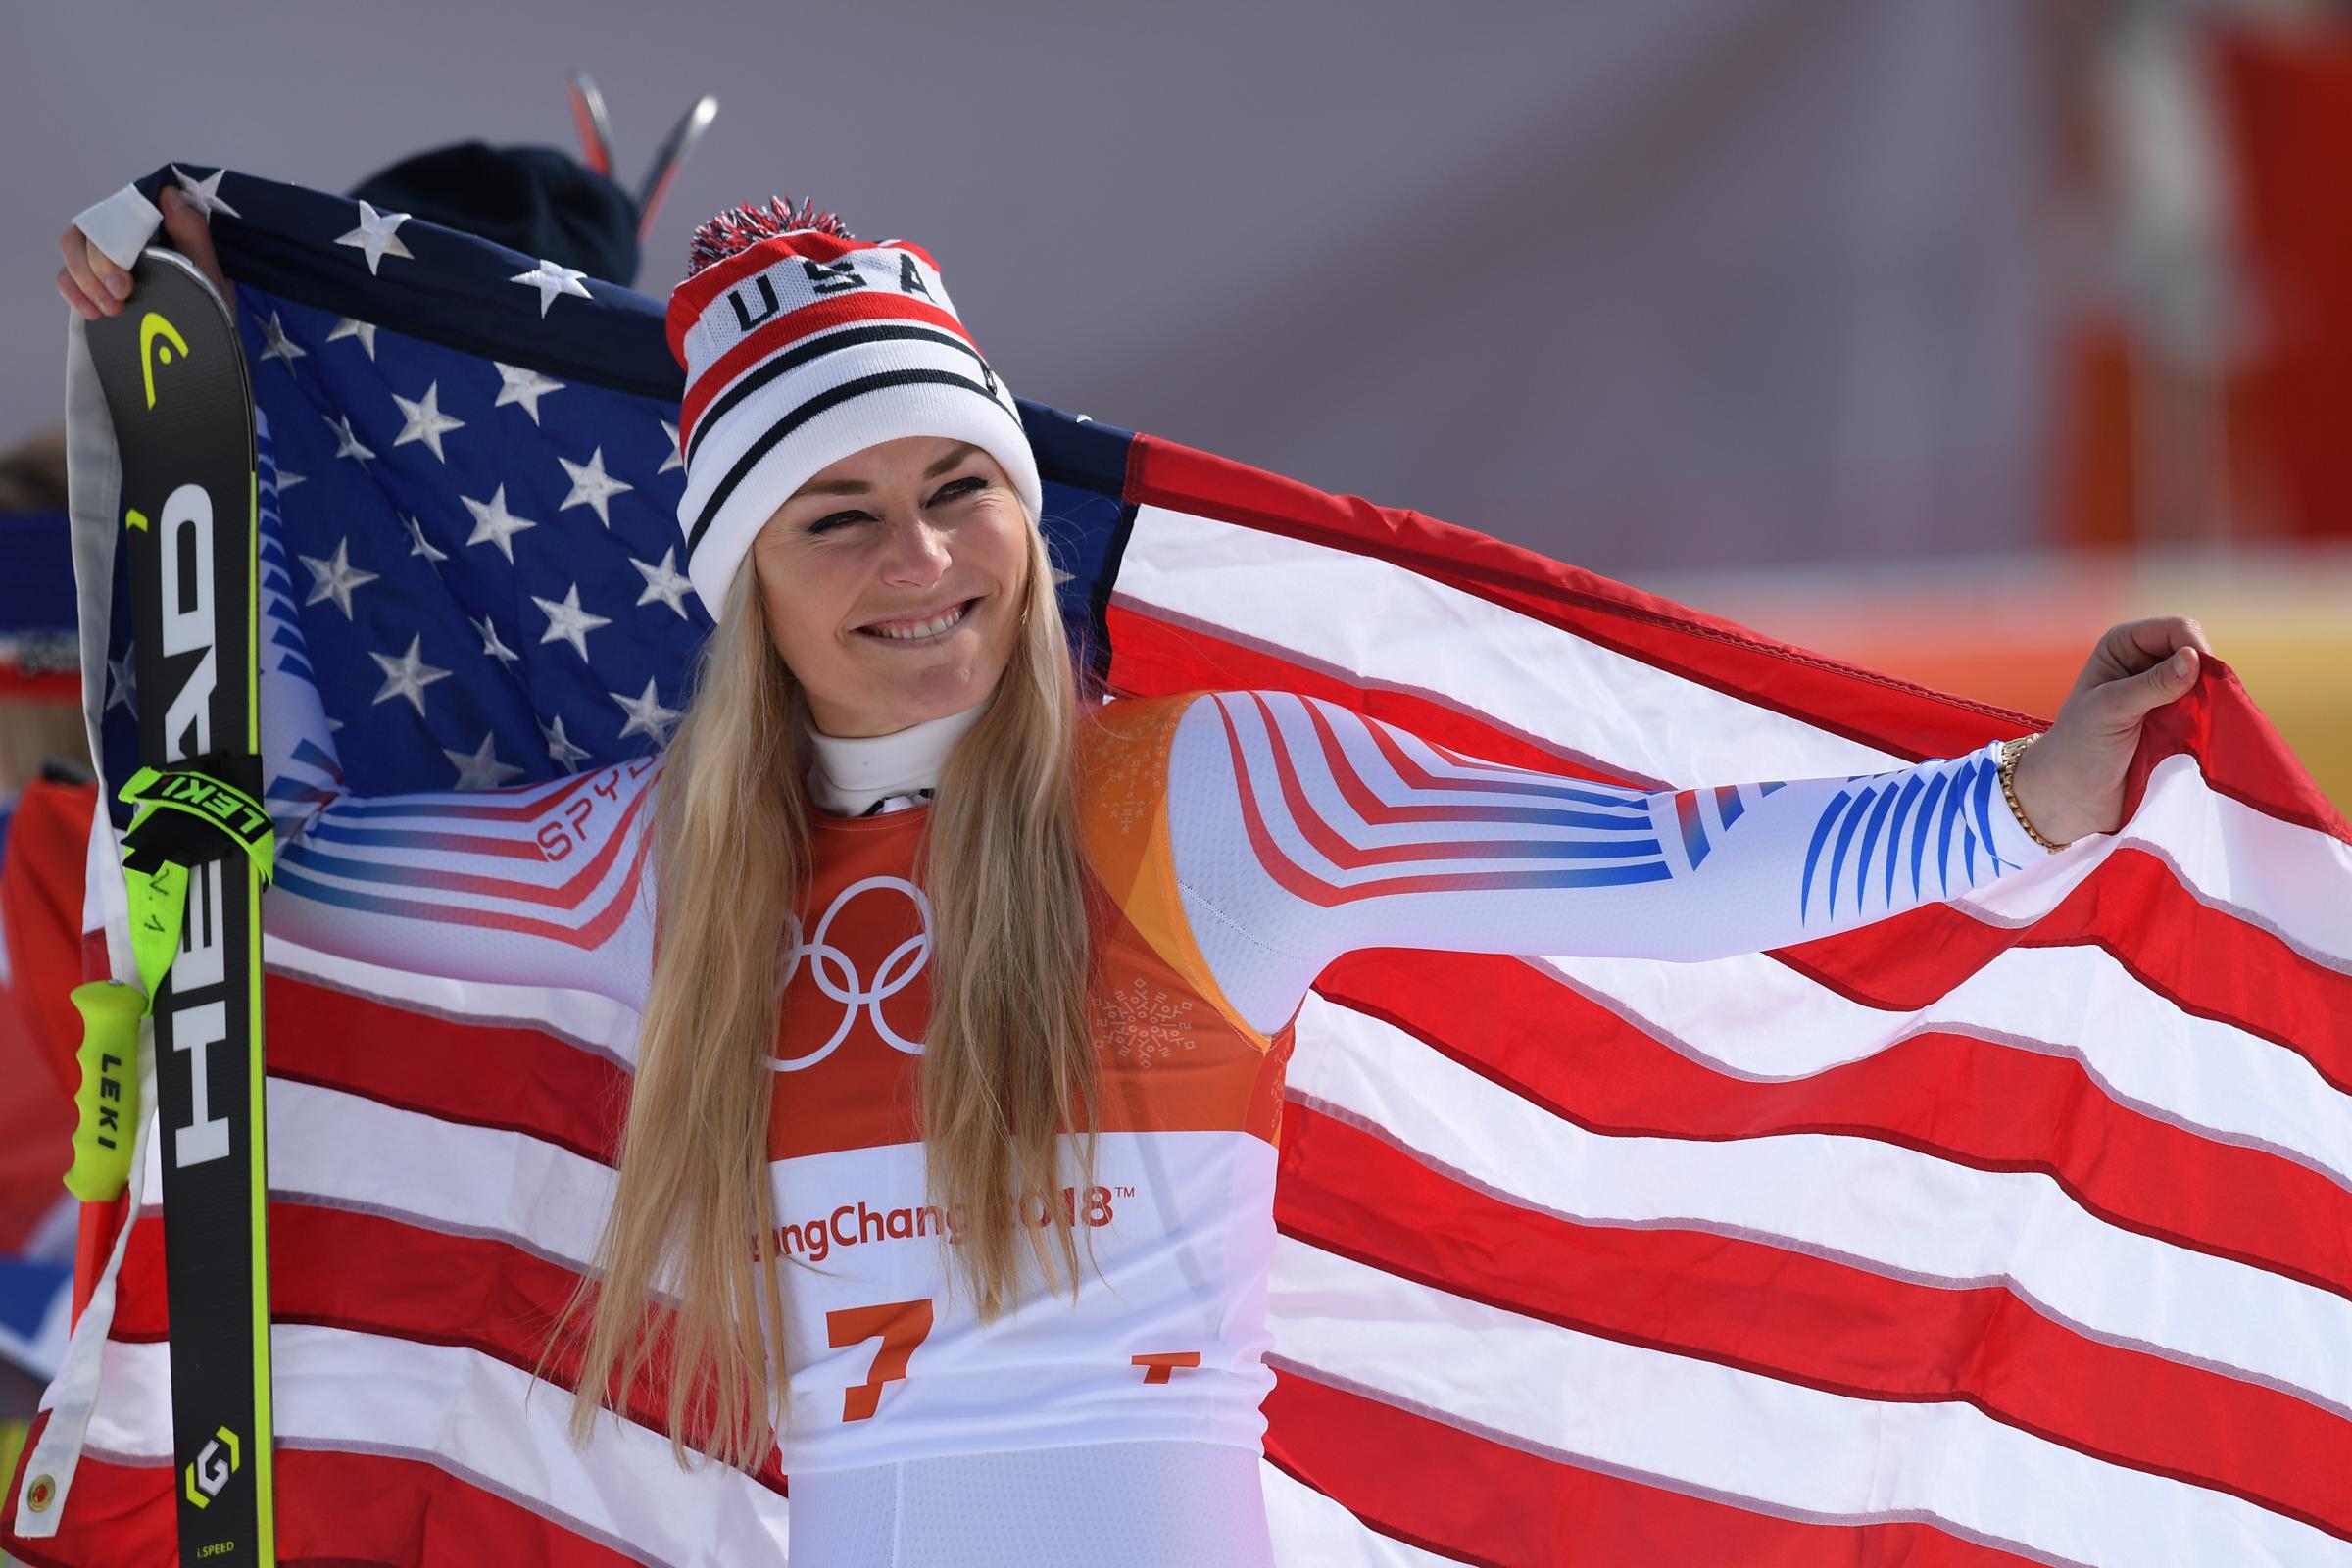 Lindsey Vonn Wins Bronze in Ladies Alpine Skiing Downhill at Winter Olympics Day 12